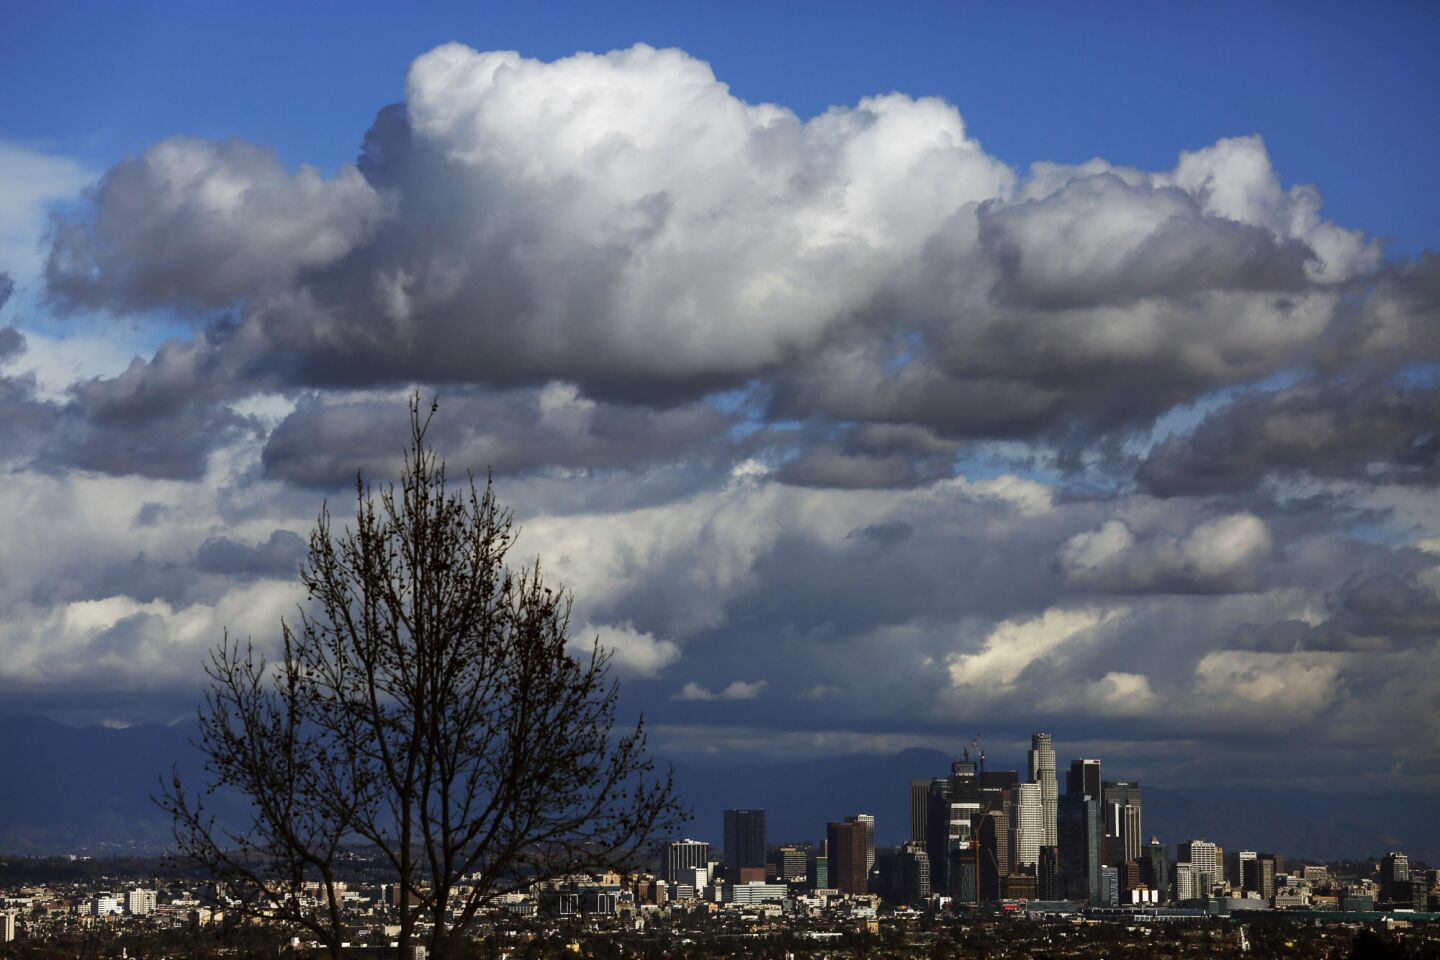 A passing storm, as seen from the Kenneth Hahn State Recreation Area, makes its way over Los Angeles on Thursday.